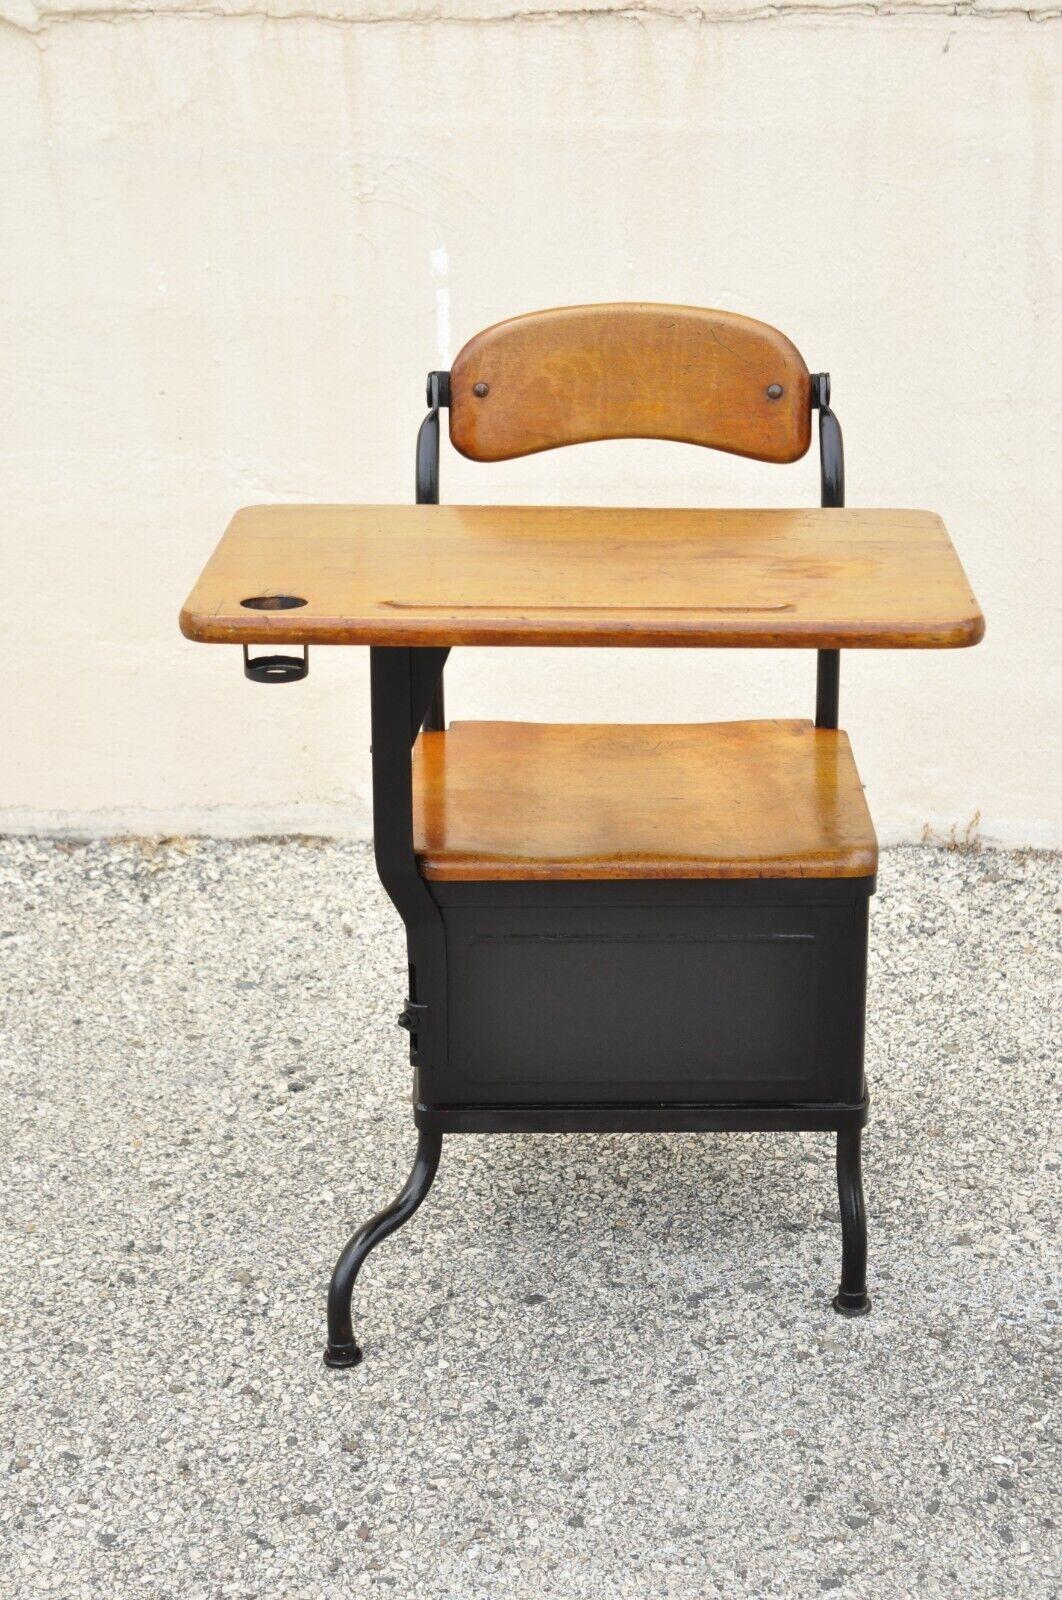 Antique American industrial iron and maple childs school writing desk. Item features a lower cubby storage to side, iron frame, pivoting backrest, very nice antique item, quality American craftsmanship, great style and form. Circa early 20th